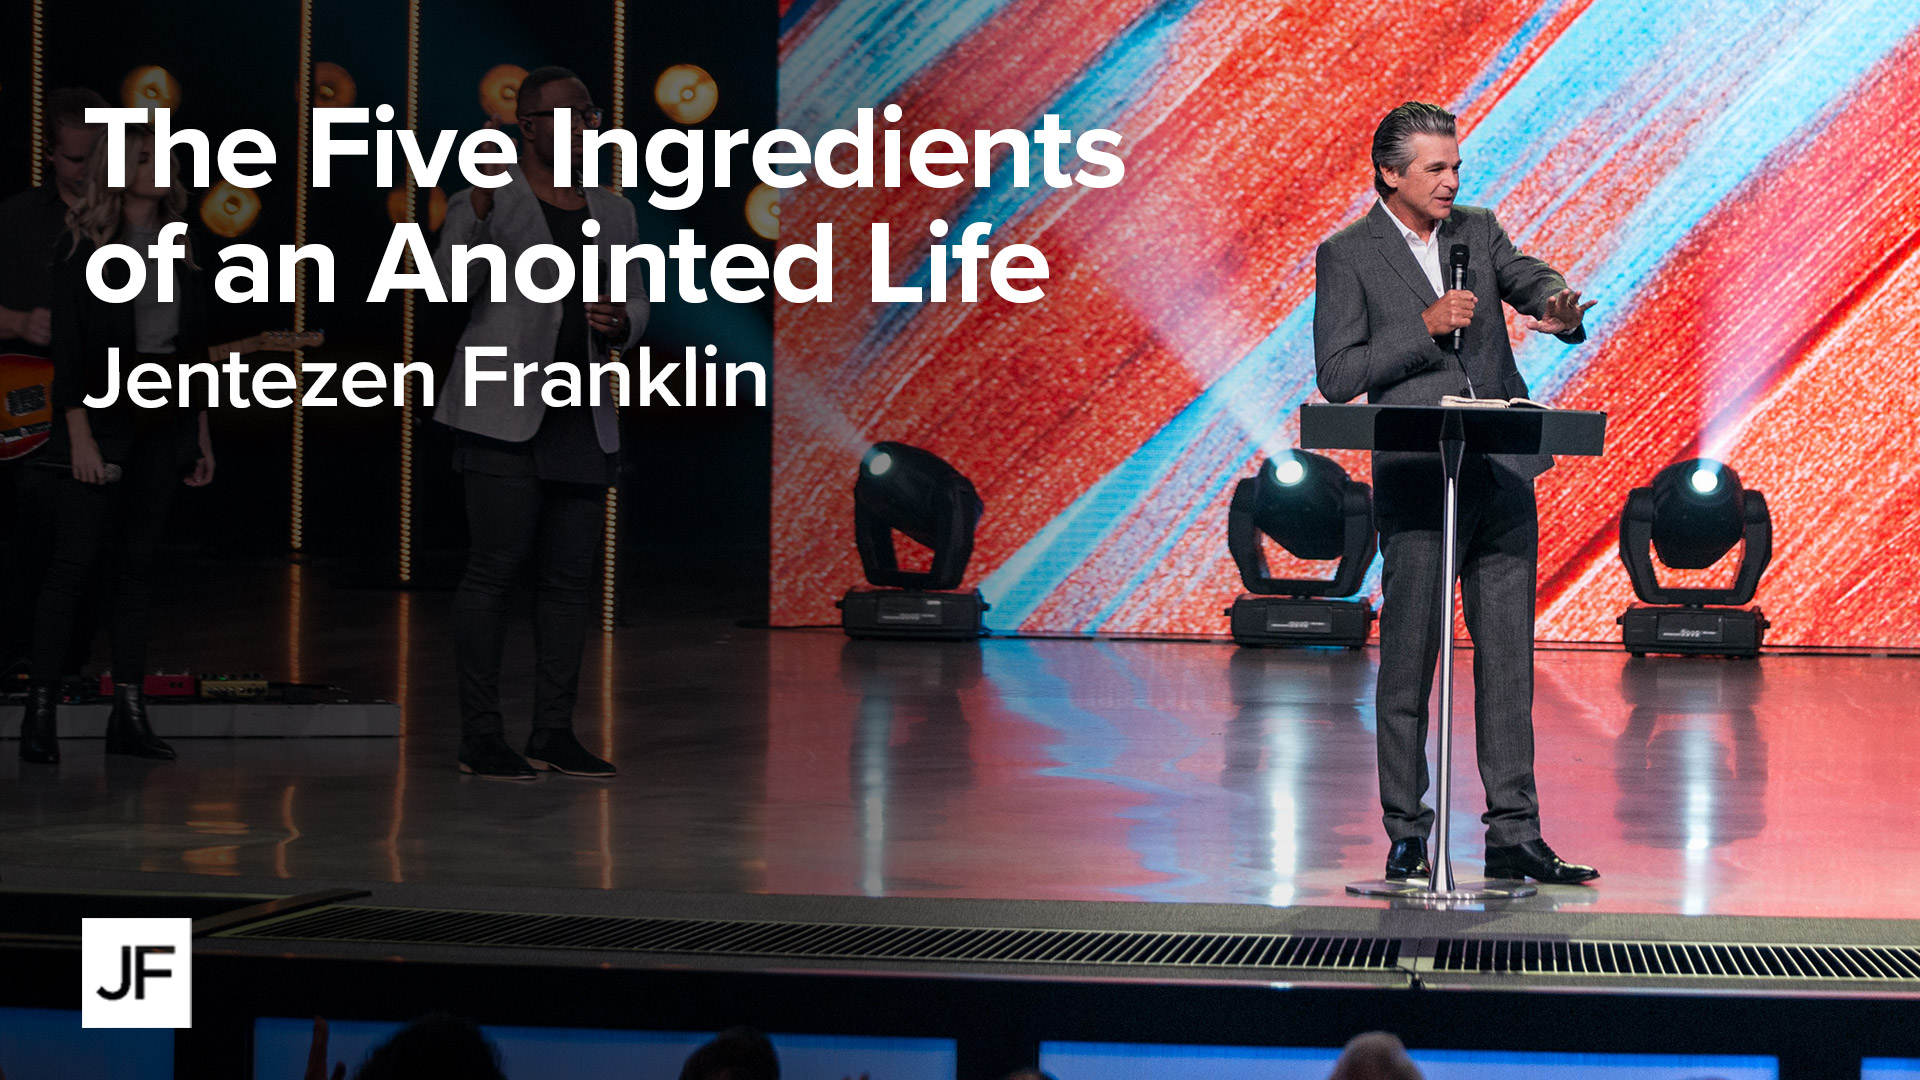 The Five Ingredients of a Anointed Life